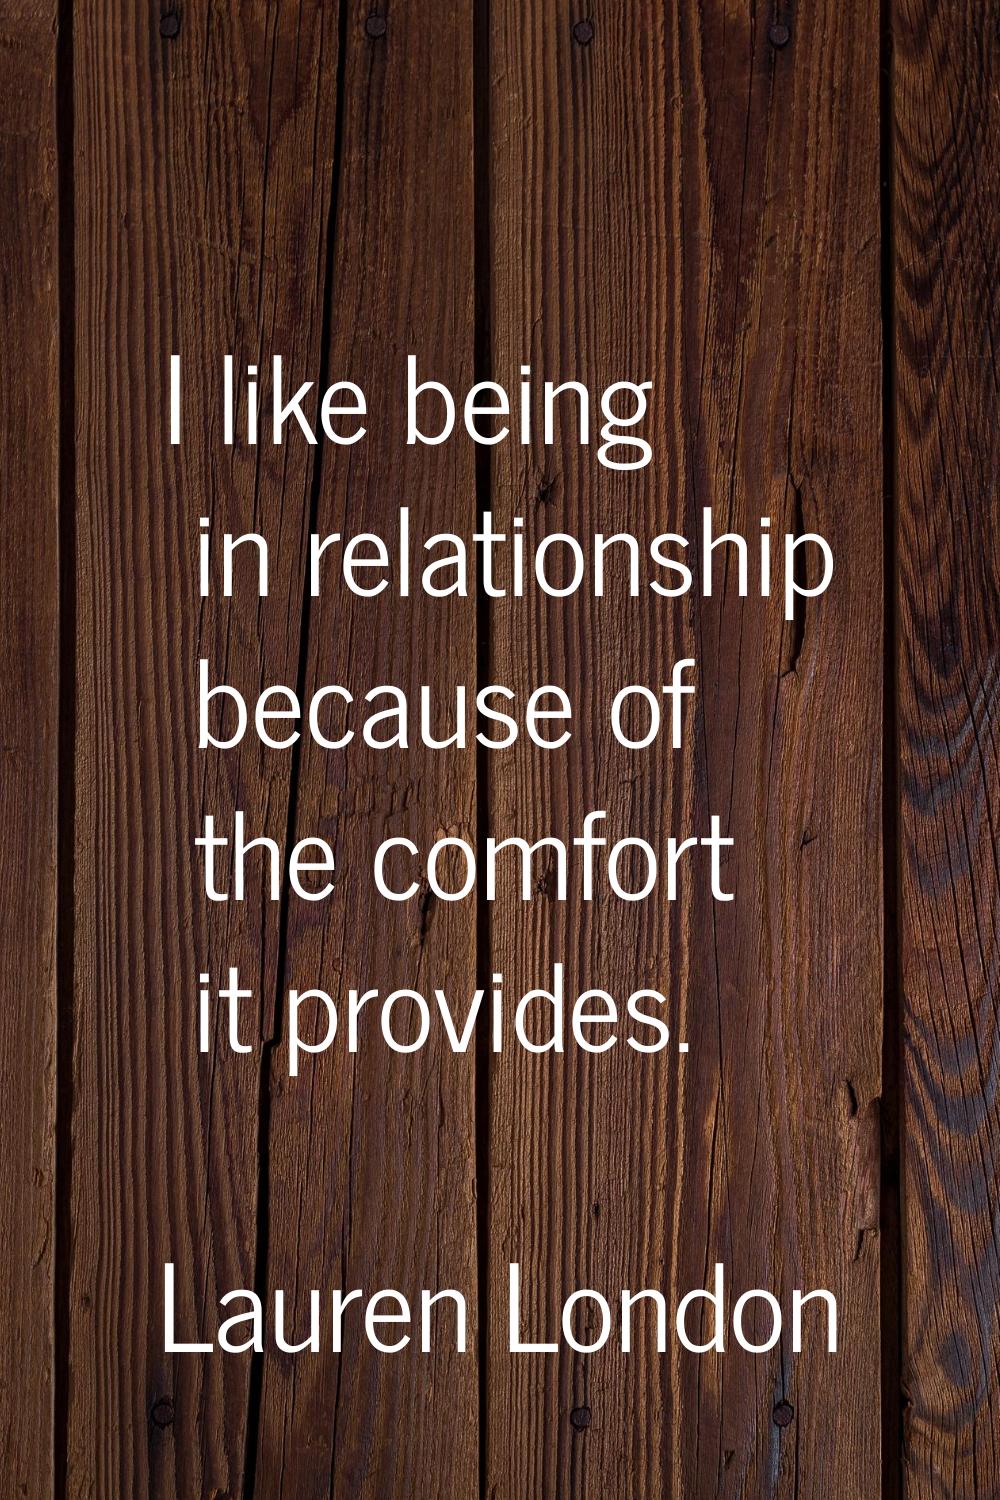 I like being in relationship because of the comfort it provides.